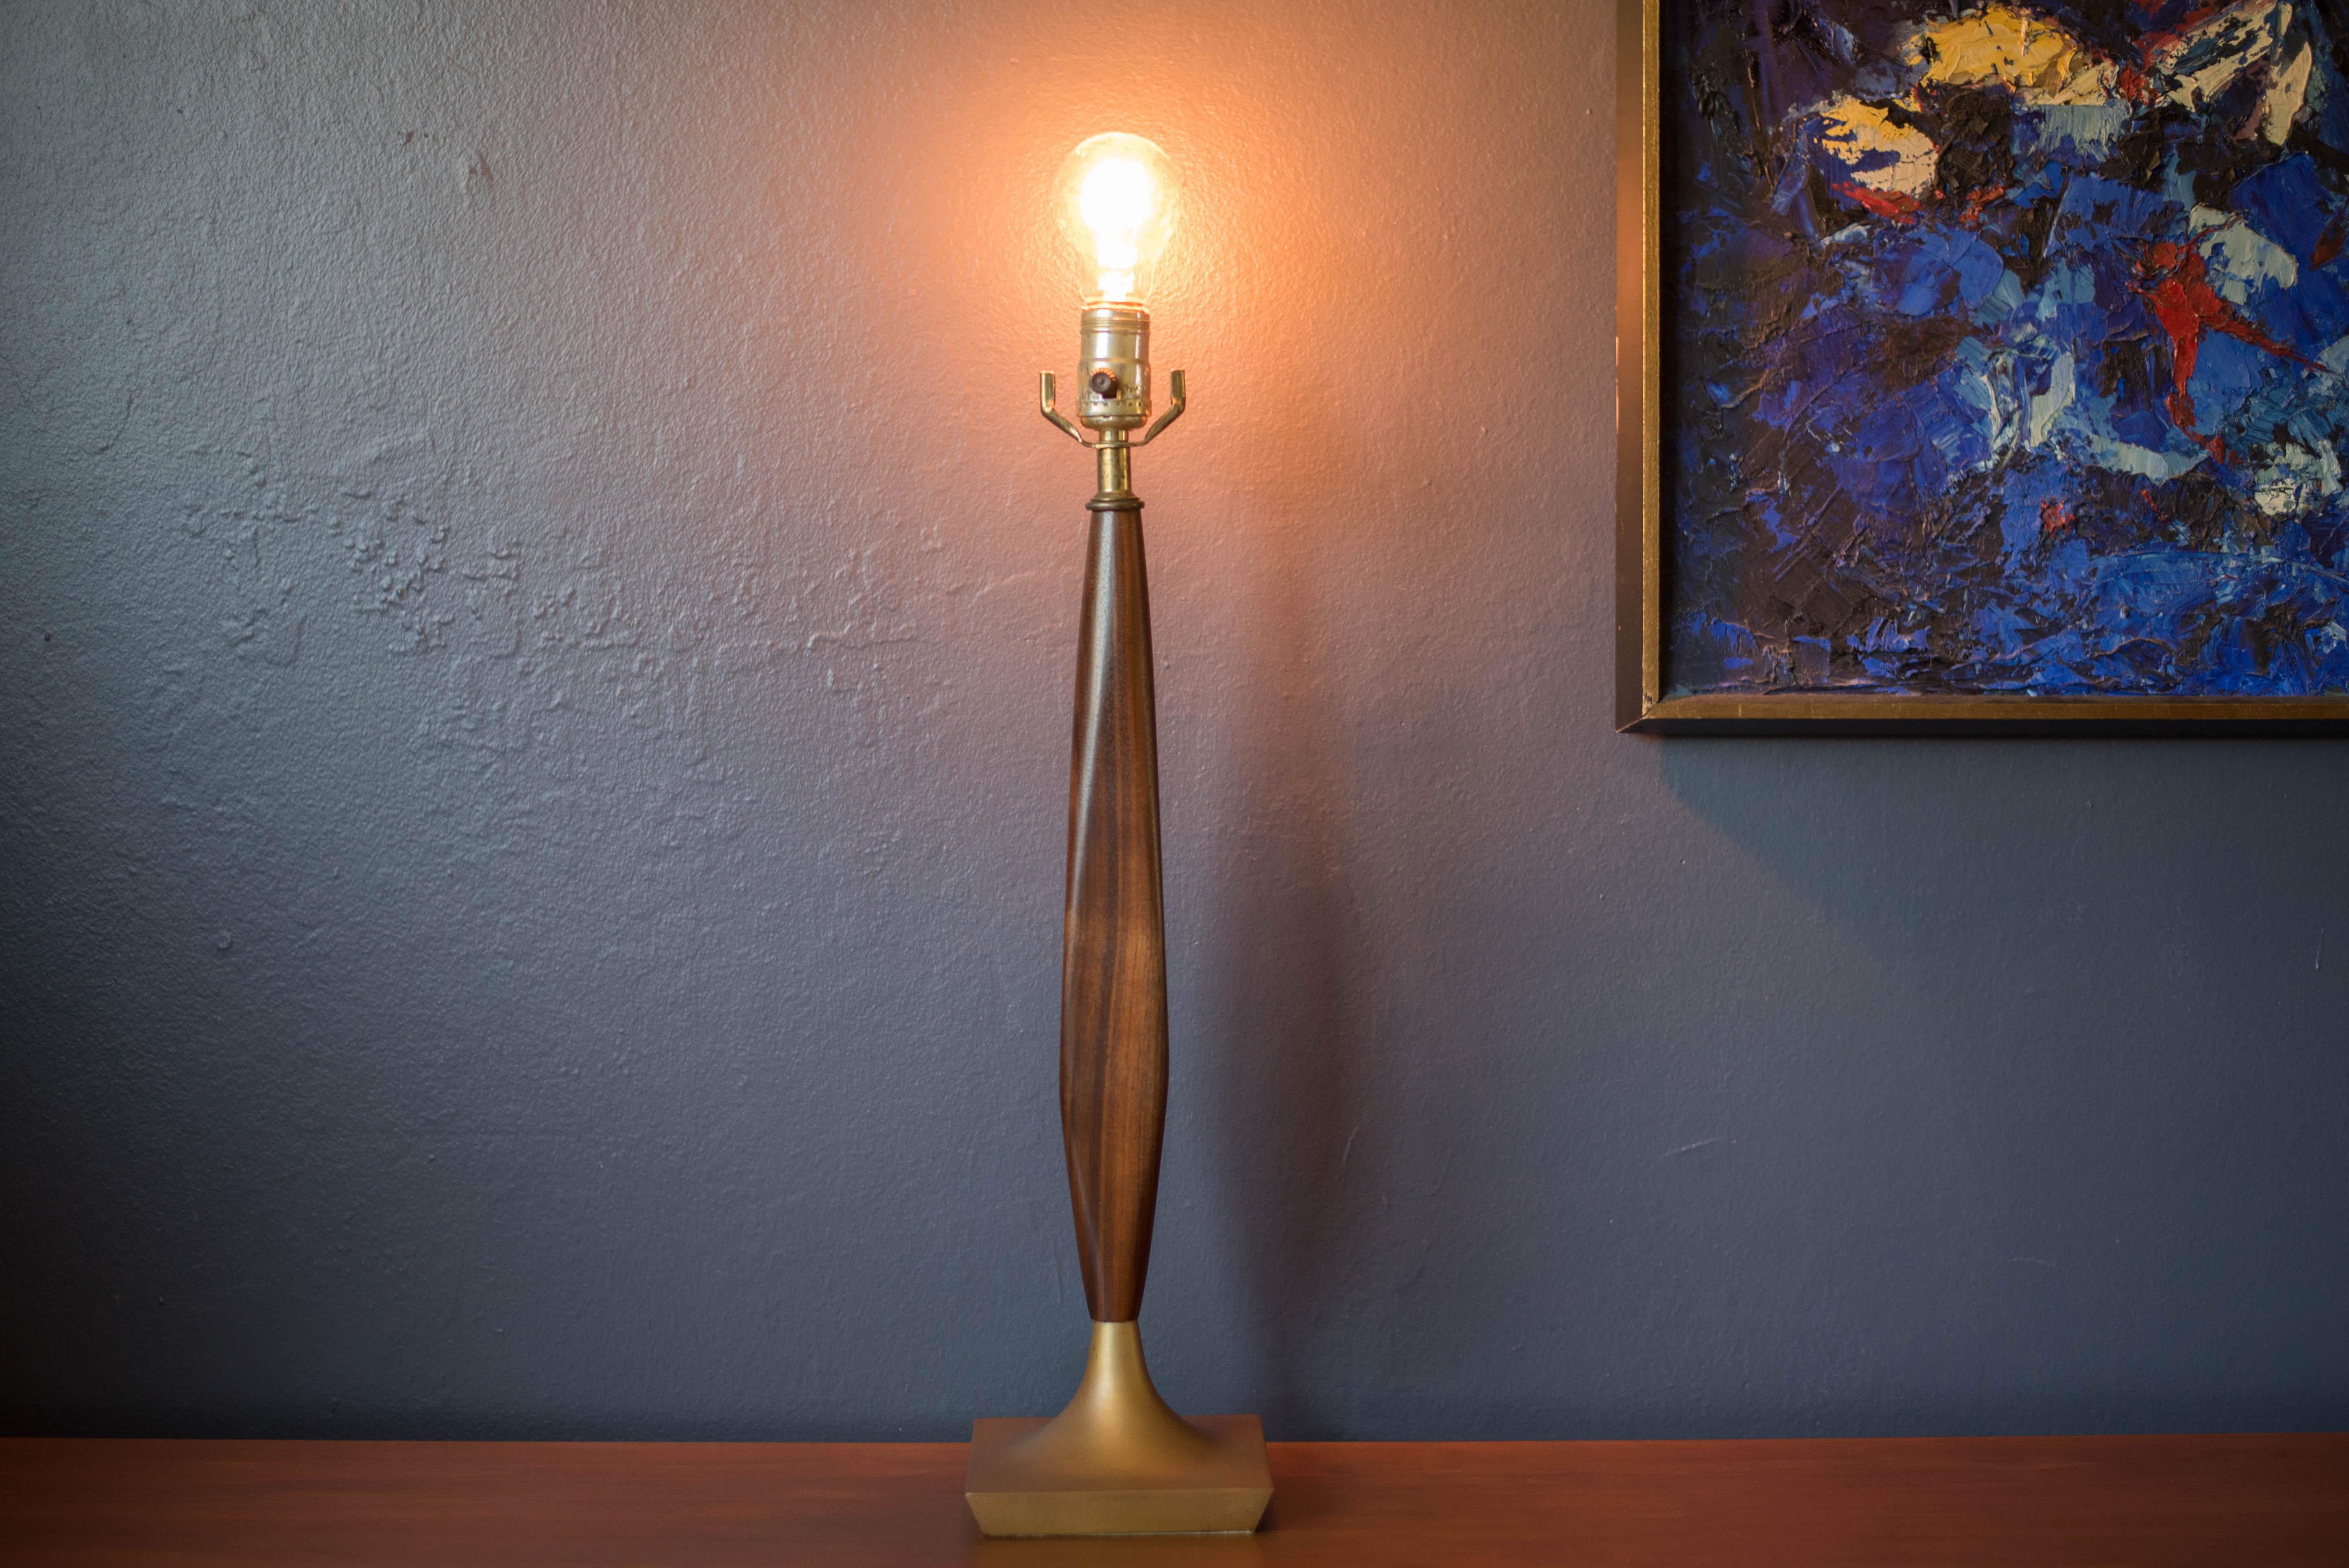 Mid-Century Modern accent table lamp circa 1960s This piece features a sculptural walnut stem and a brass base. Includes a three-way switch.